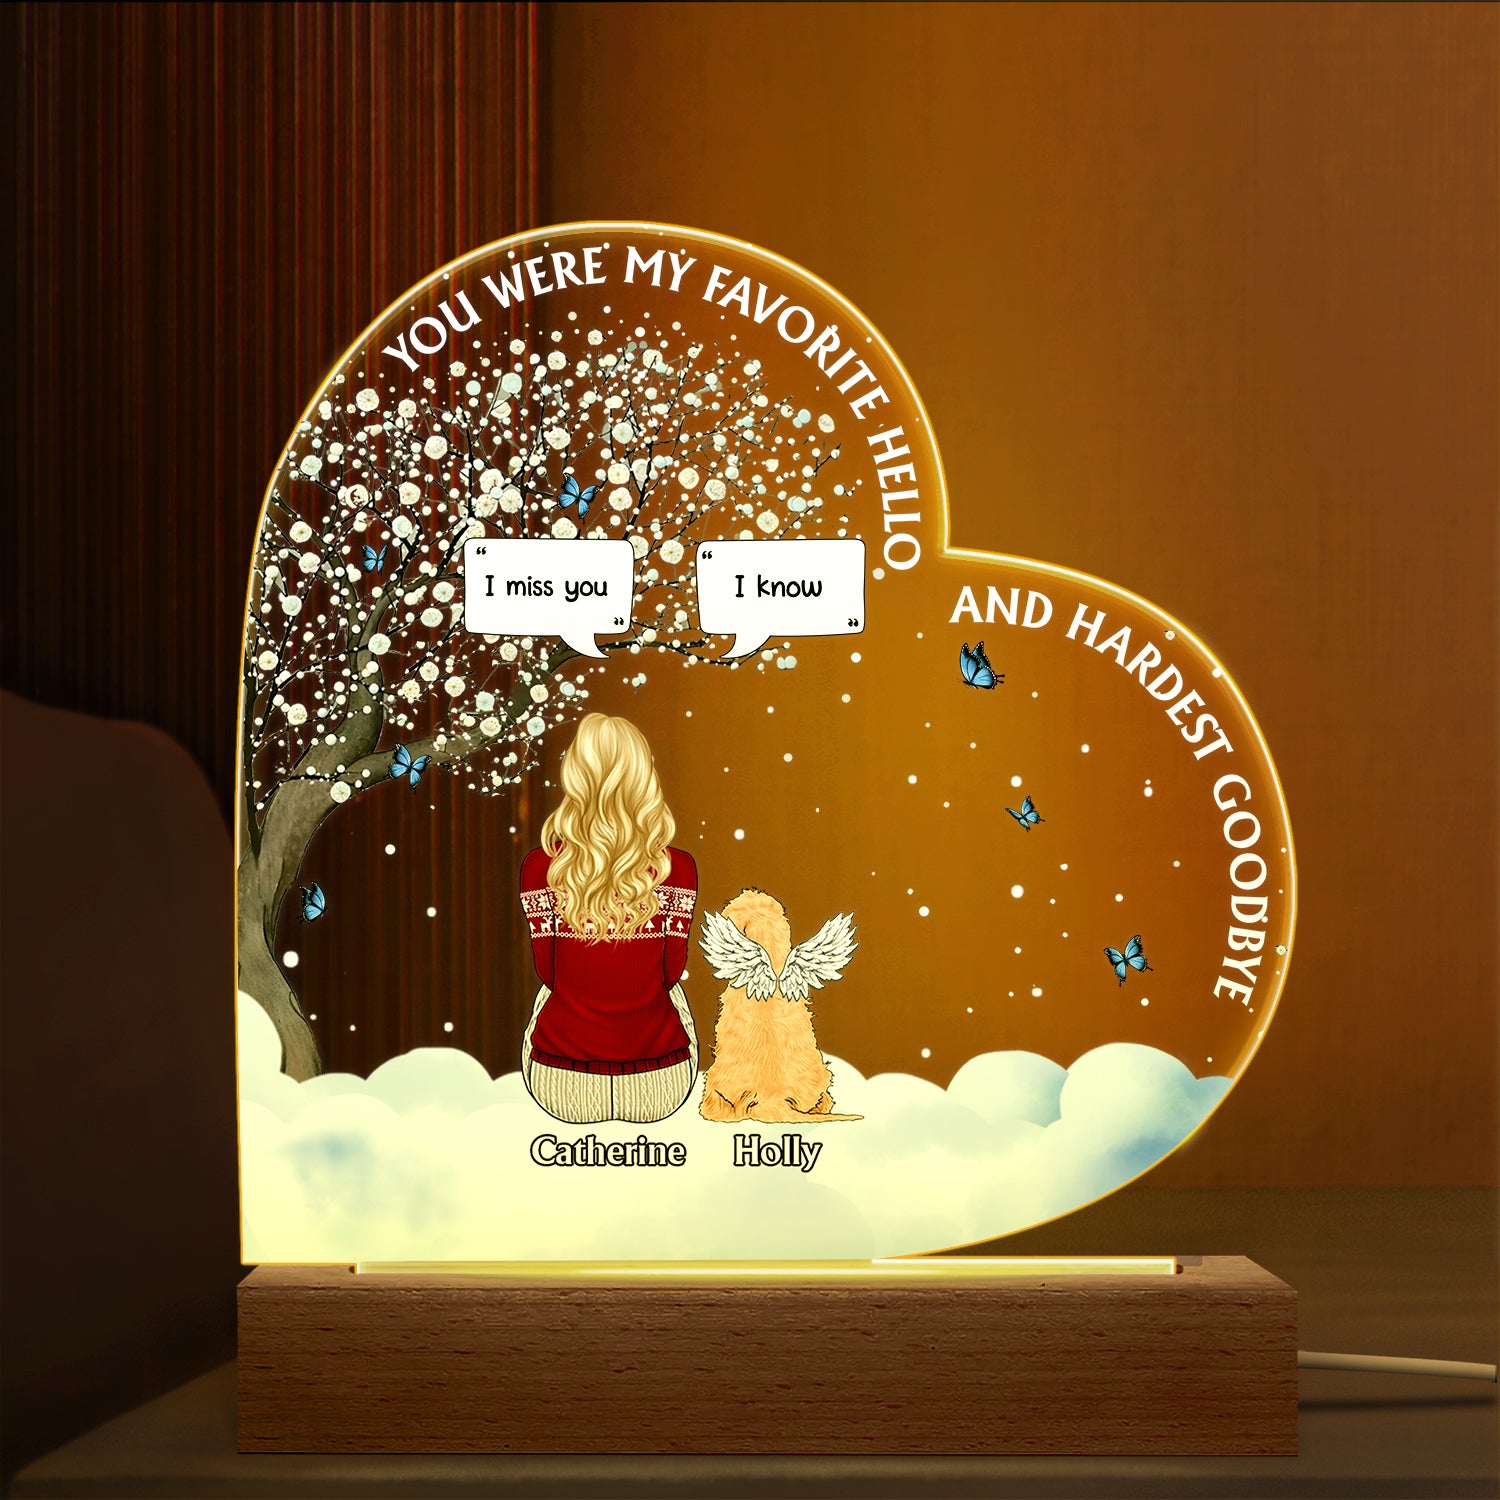 You Were My Favorite Hello And Hardest Goodbye - Memorial Gift For Pet Lovers - Personalized 3D Led Light Wooden Base